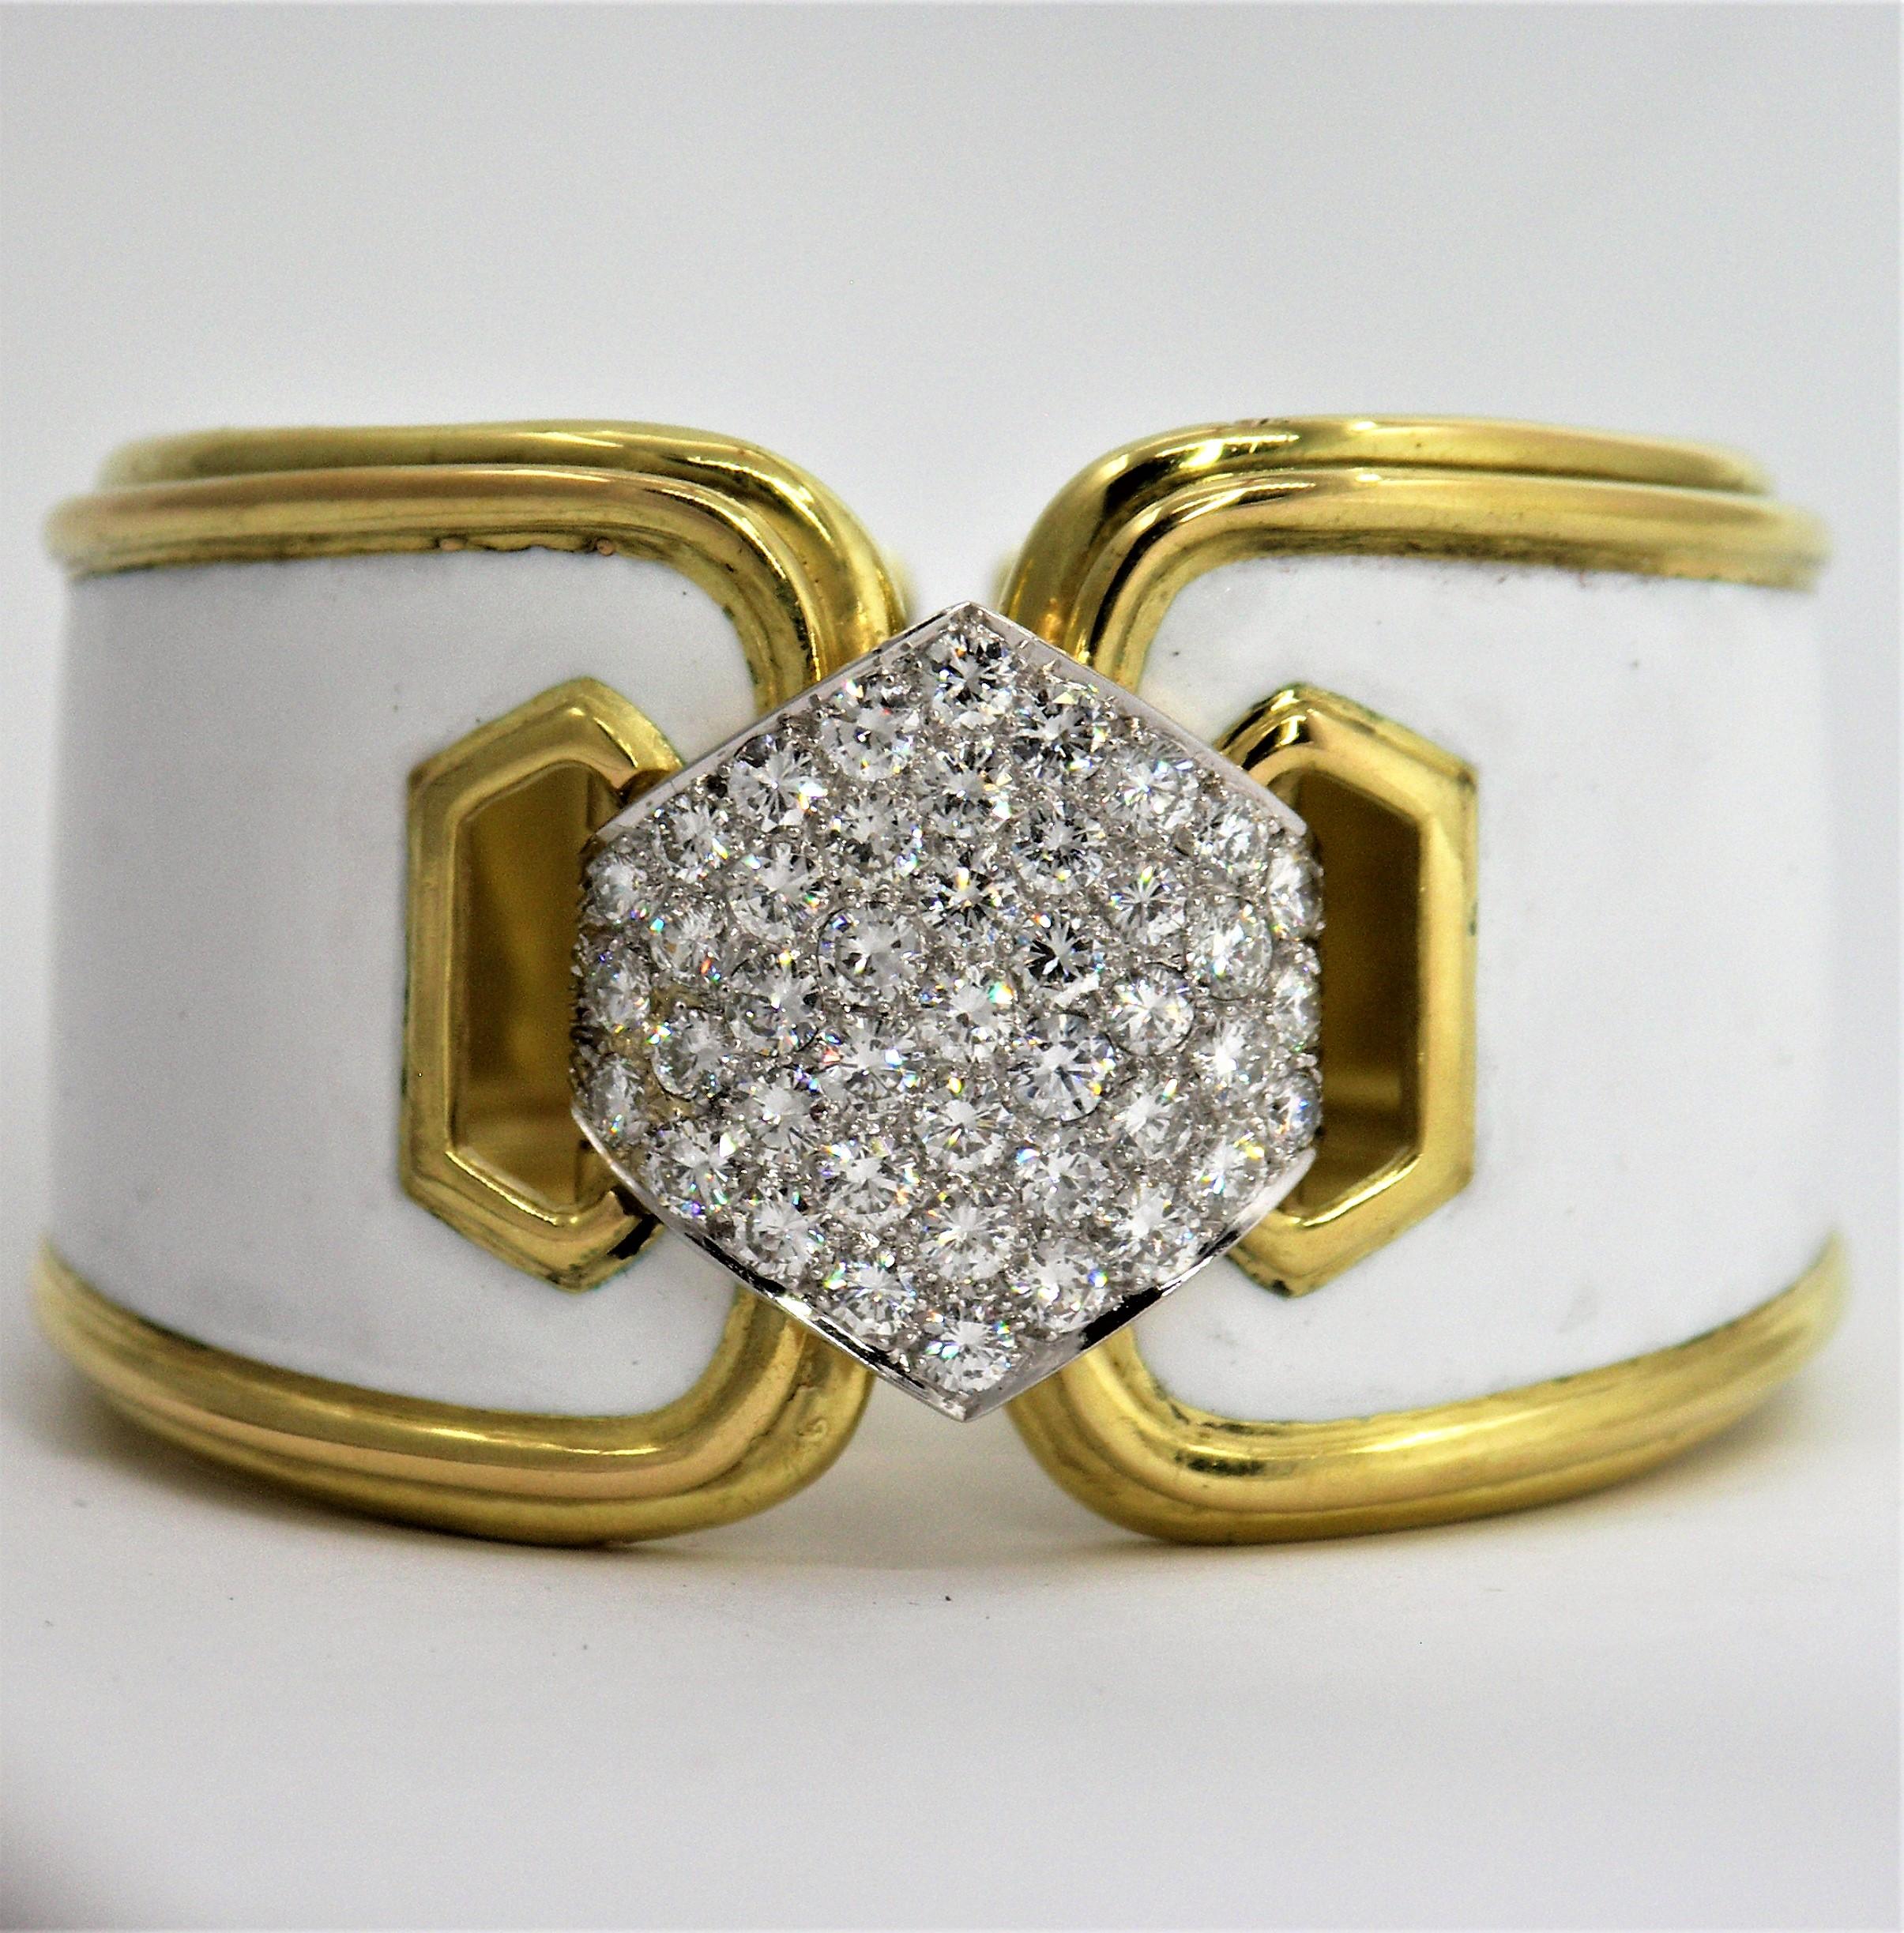 A ladies 18 karat yellow gold hinged cuff bracelet, centered around a hexagonal platinum plate with pave set diamonds weighing a total of approximately 6.5 carats of overall E/F color and VVS2/VS1 clarity.  The edges of the bracelet feature a tiered